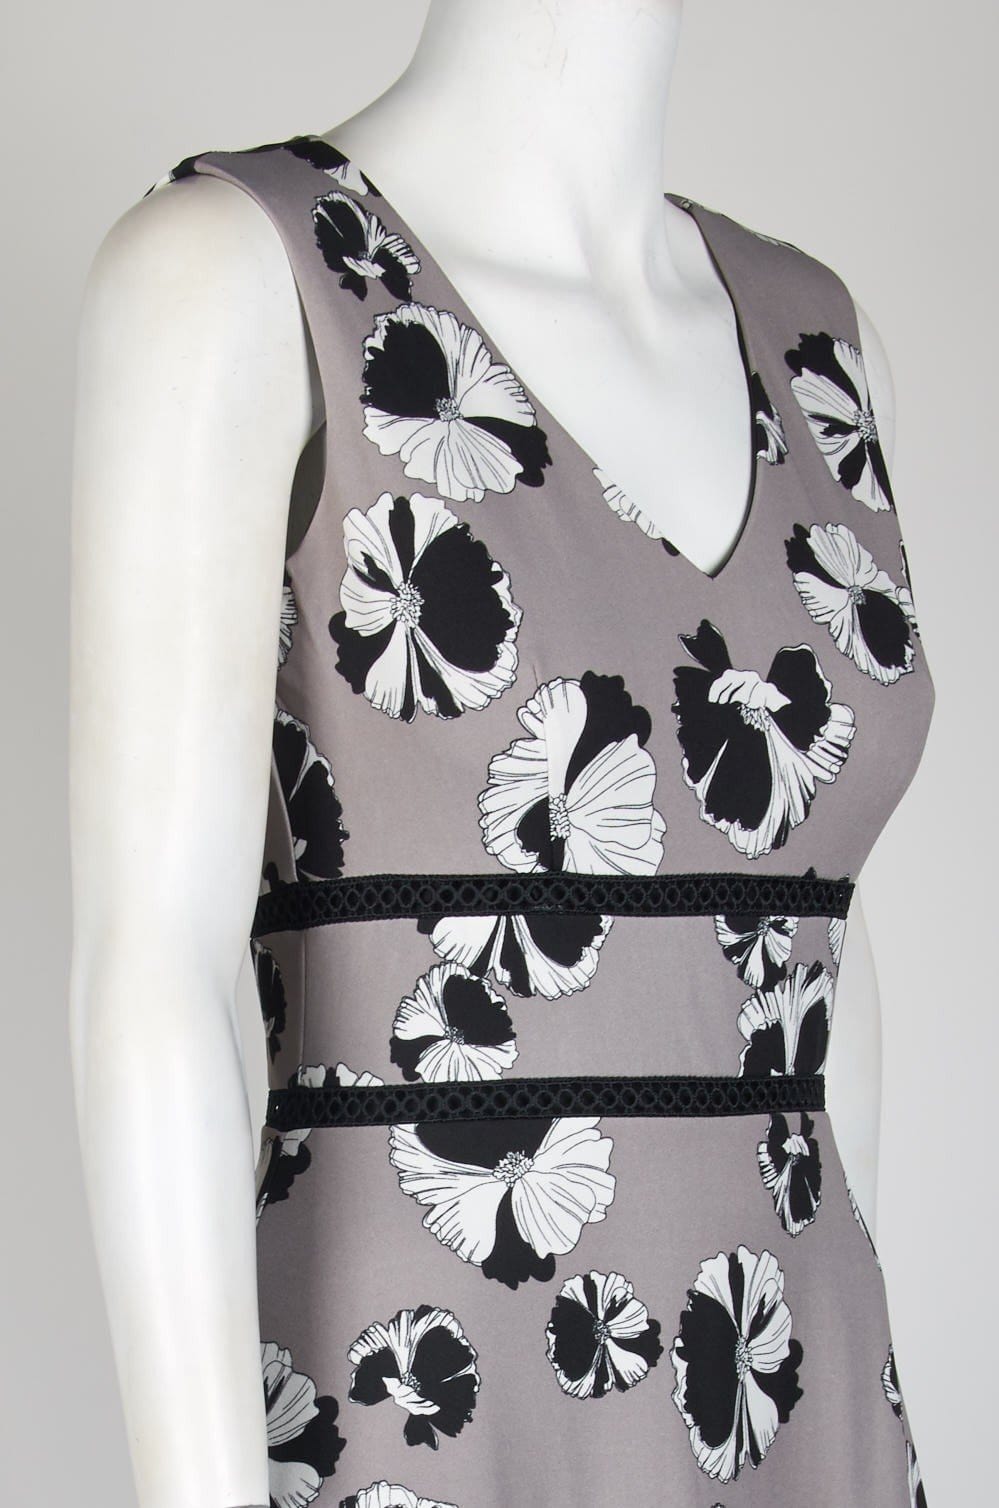 Taylor - 1169M Floral Print V Neck Sleeveless Crepe Dress In Black and Gray